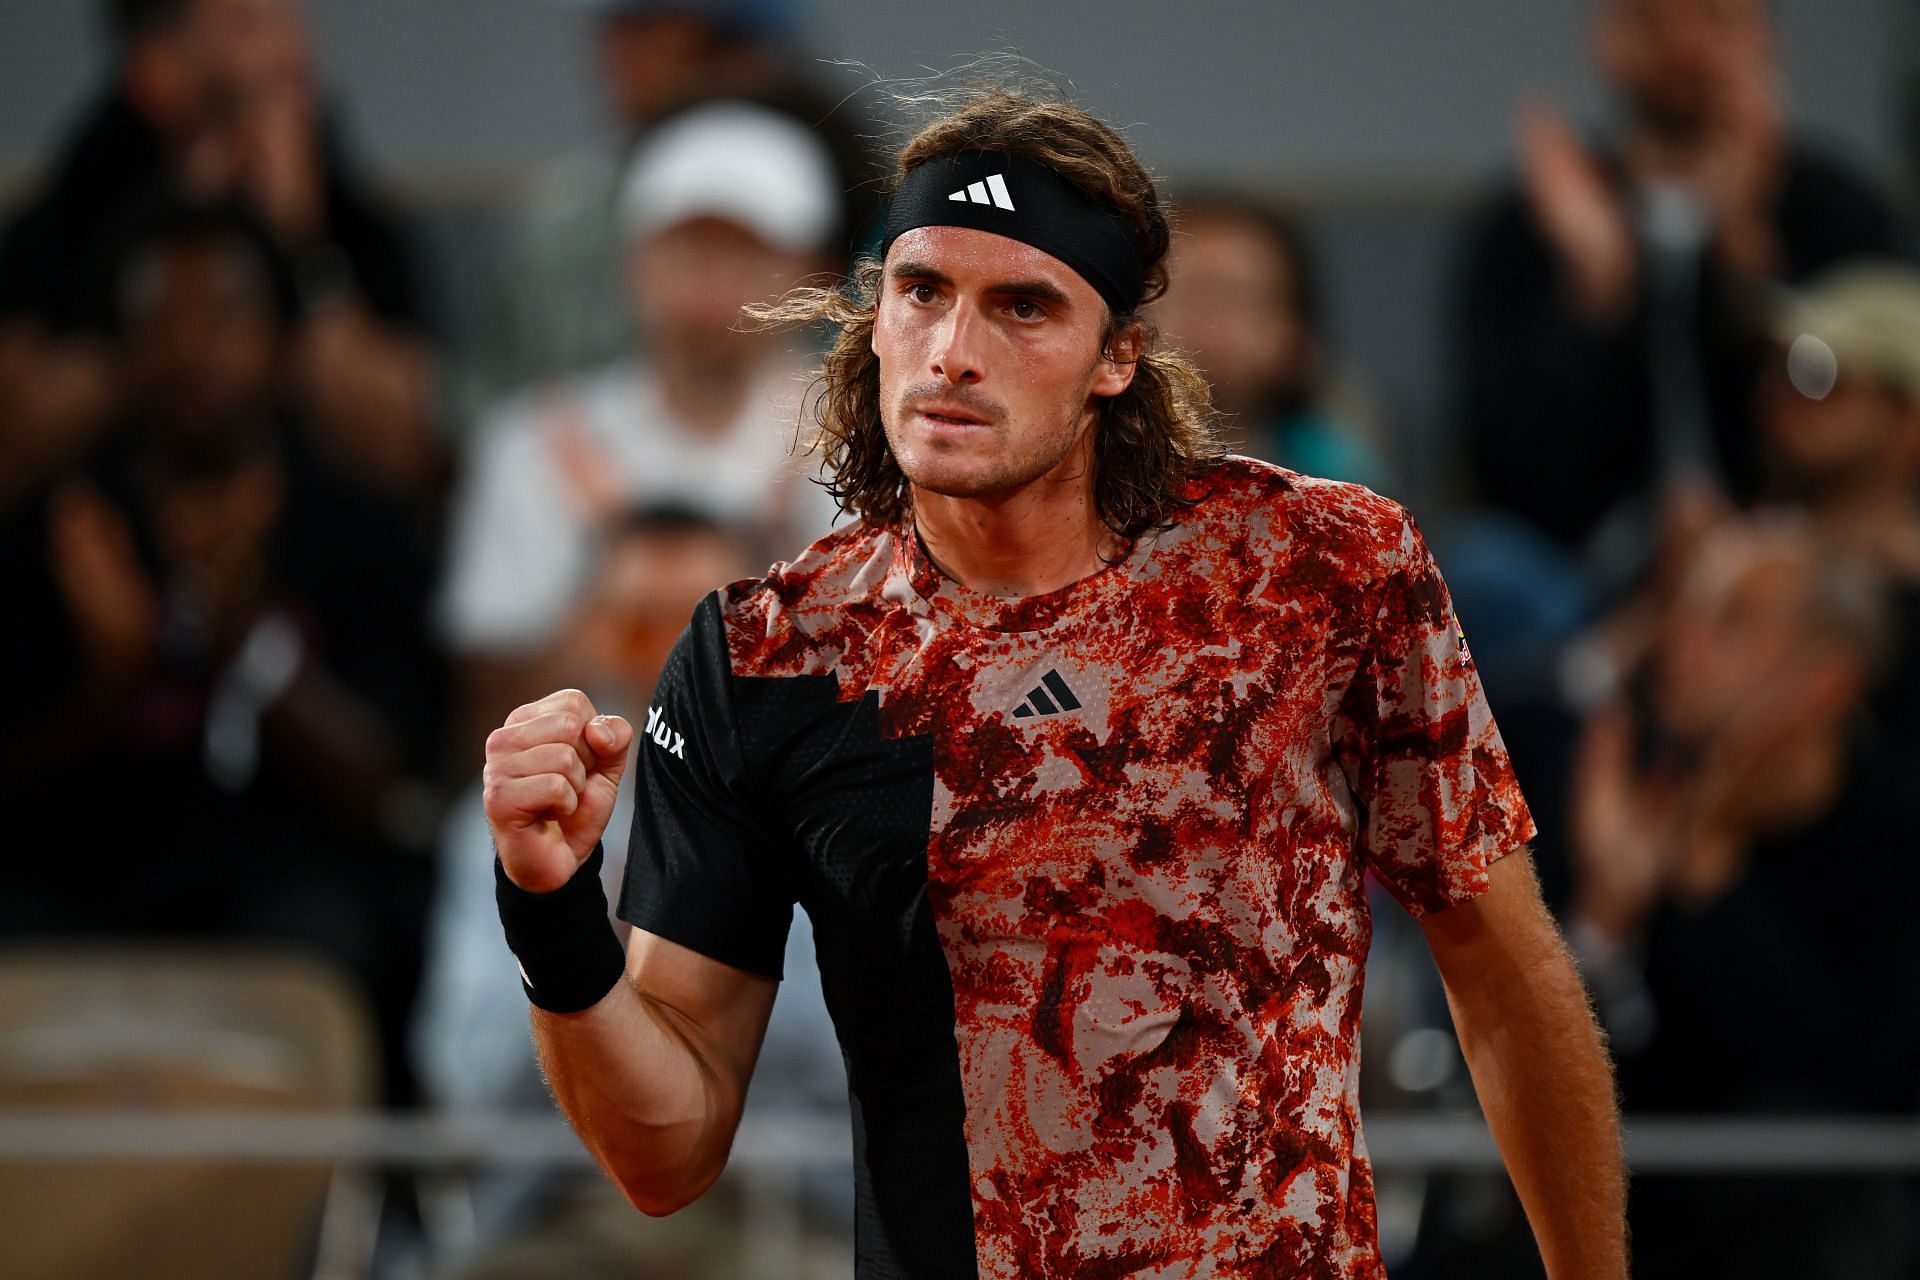 Stefanos Tsitipas will still be happy without a Grand Slam title